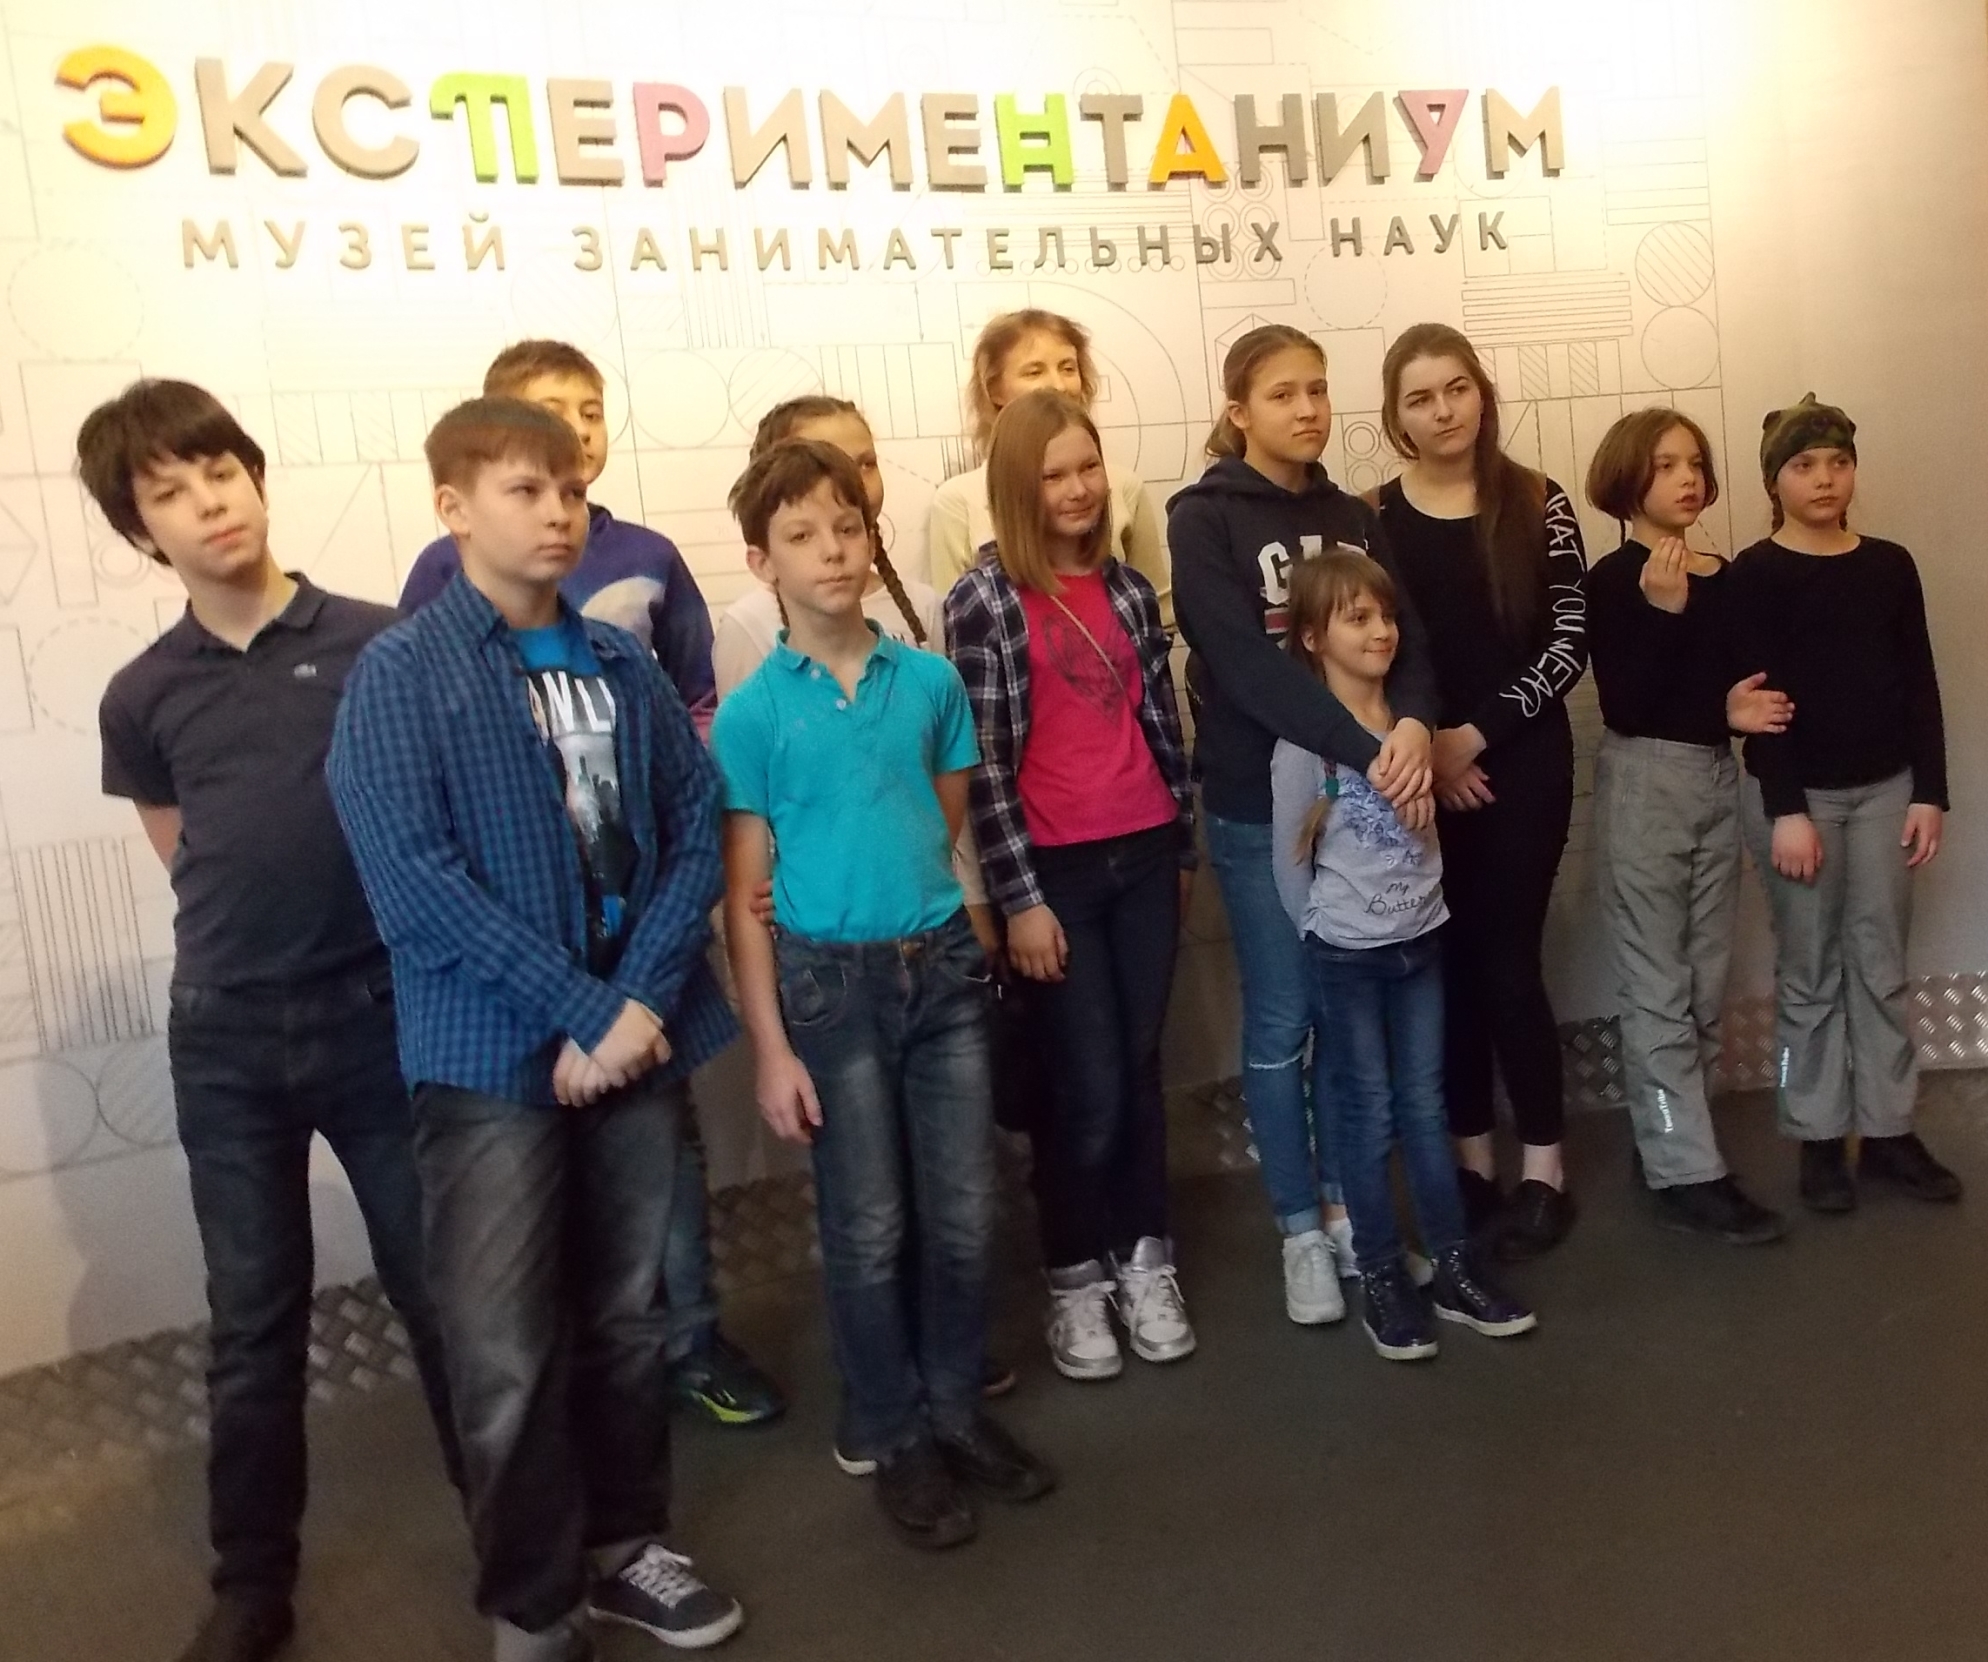 On April 10 children whose relatives live with ALS visited the Experimentanium